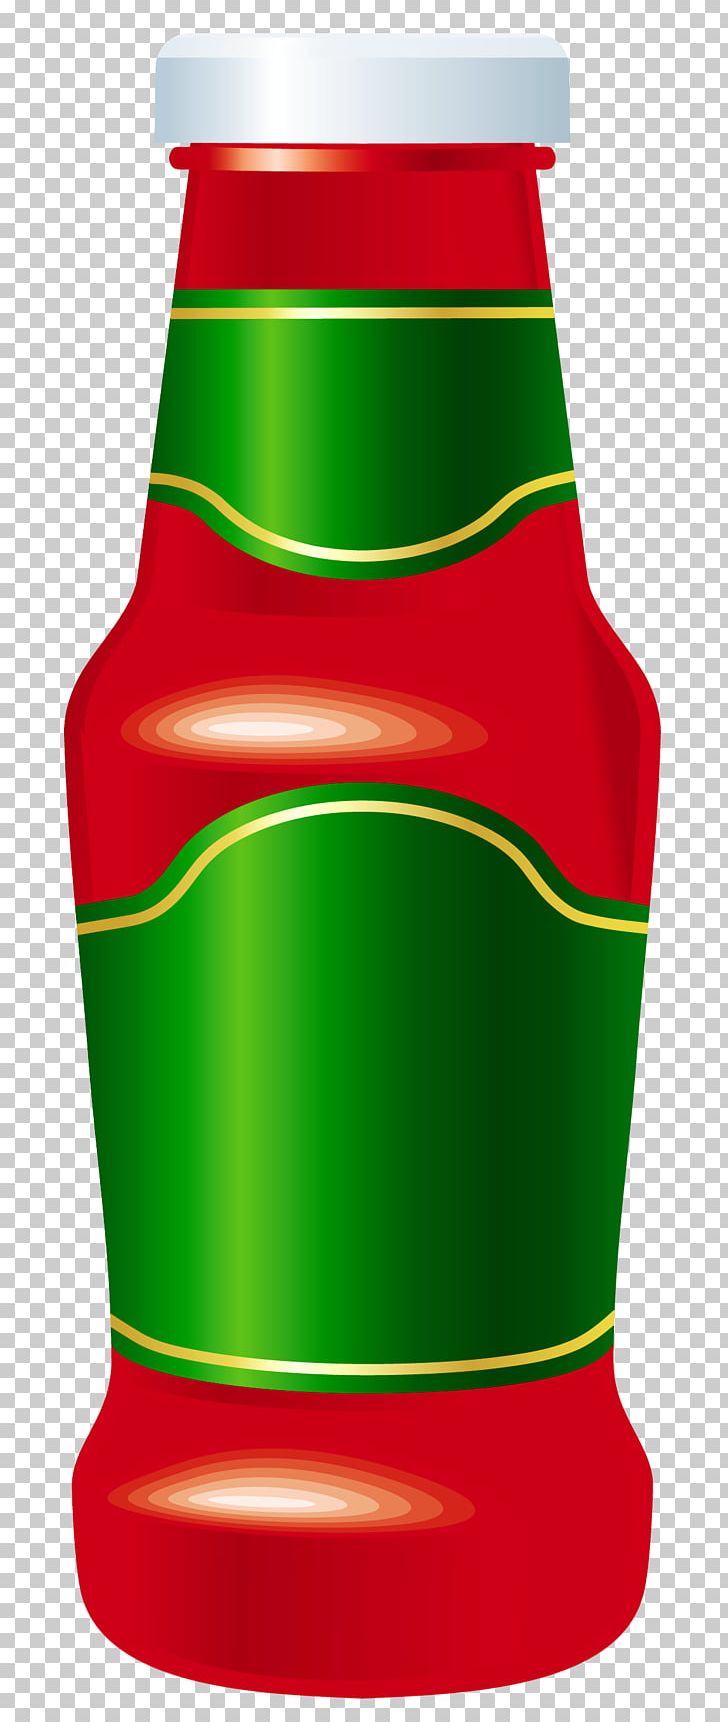 Brooks Catsup Bottle Water Tower Hot Dog Hamburger Ketchup PNG, Clipart, Barbecue Grill, Barbecue Sauce, Bottle, Brooks Catsup Bottle Water Tower, Clipart Free PNG Download